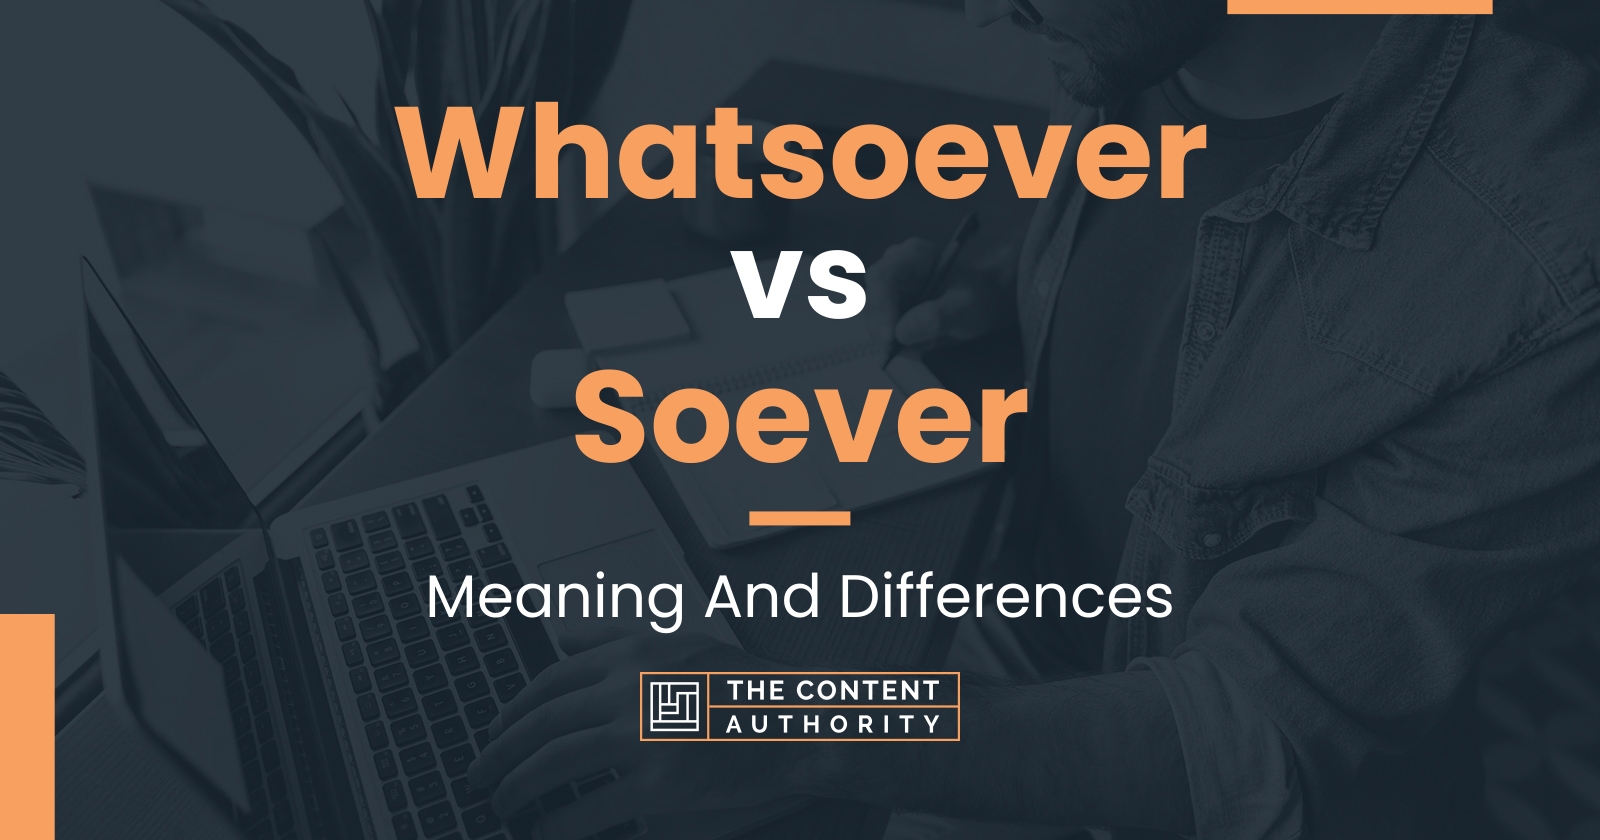 Whatsoever vs Soever: Meaning And Differences